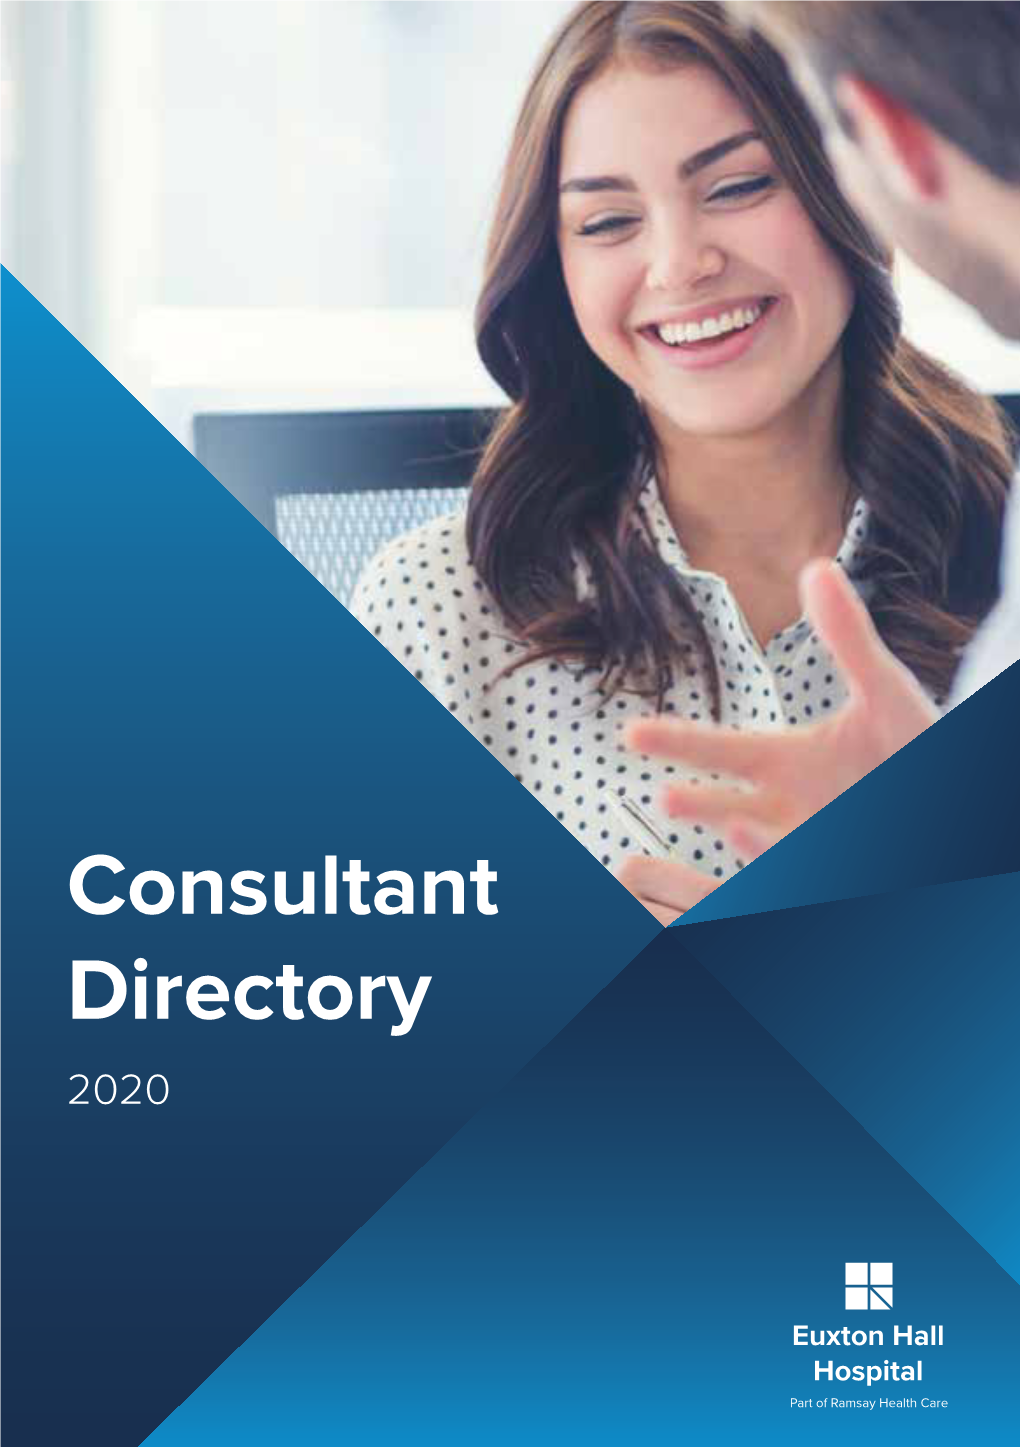 Consultant Directory 2020